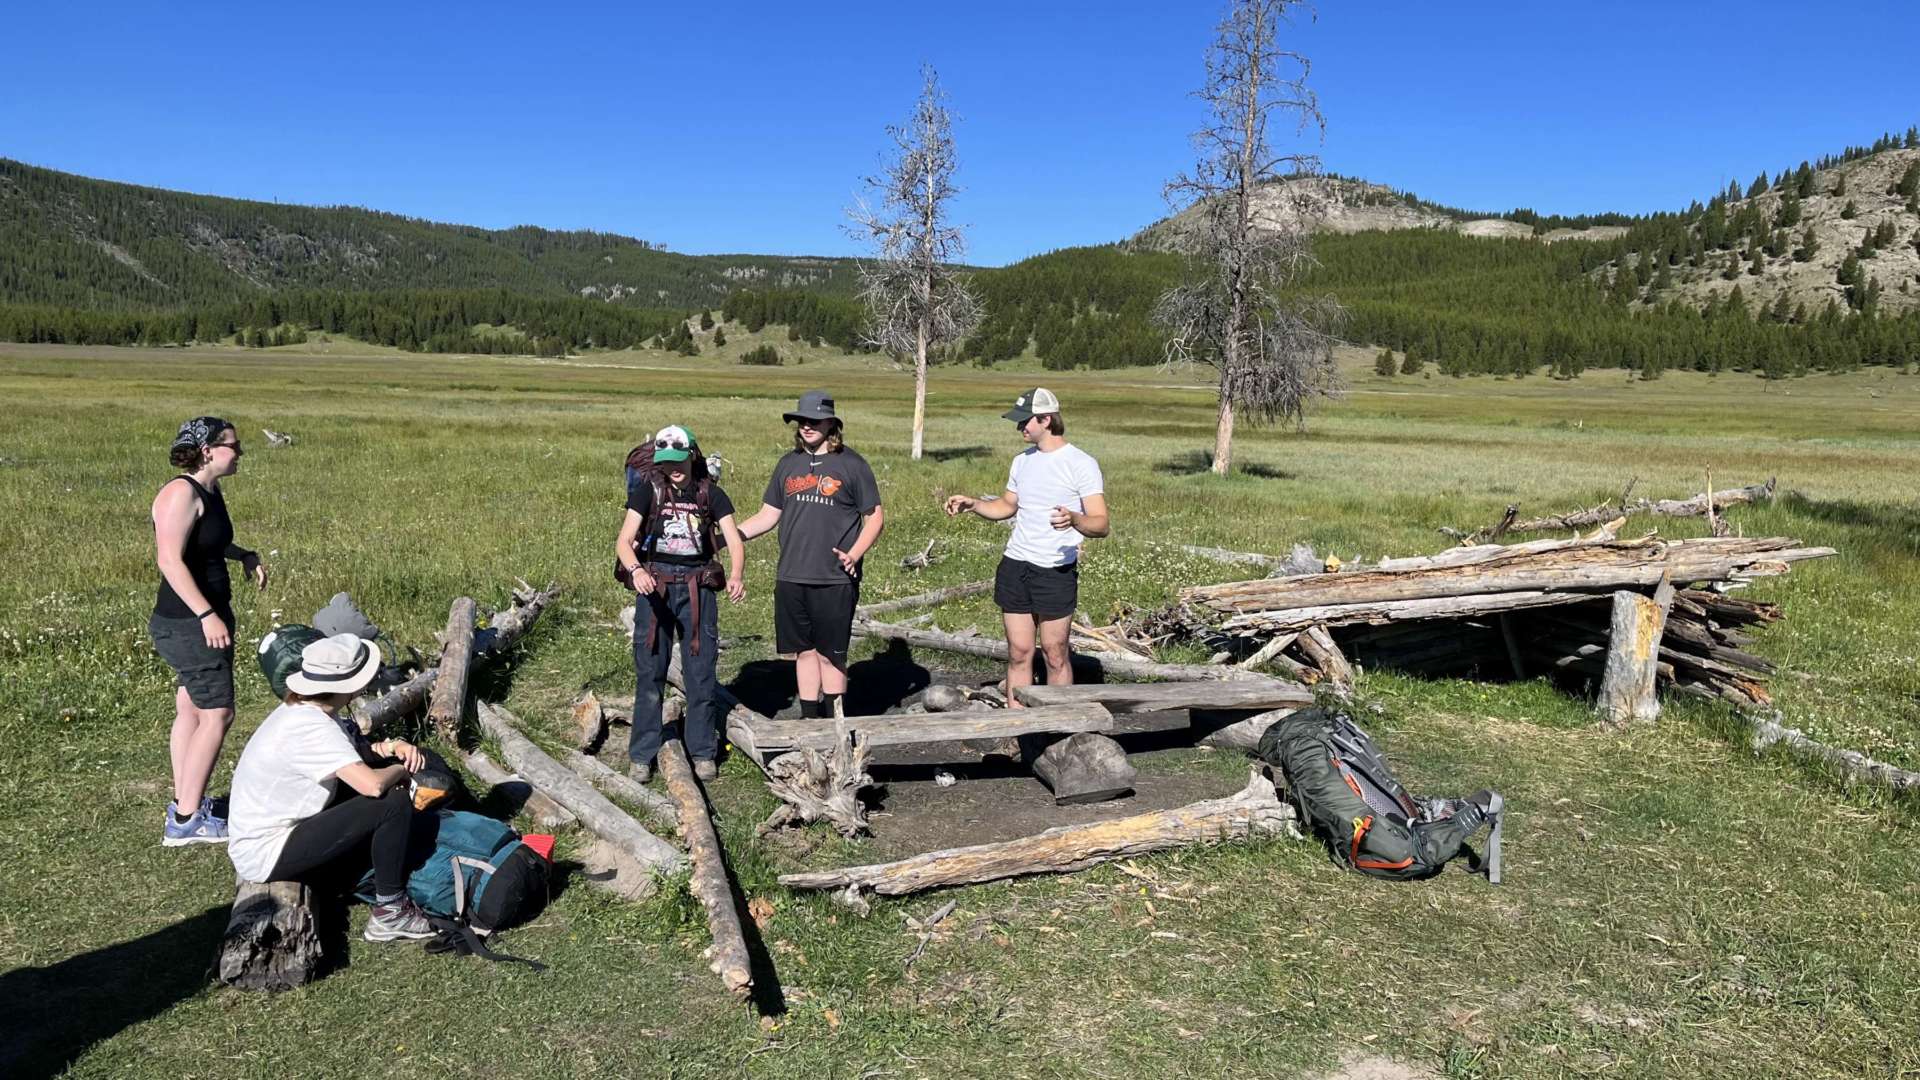 Photos of students in a field near a downed tree at Yellowstone